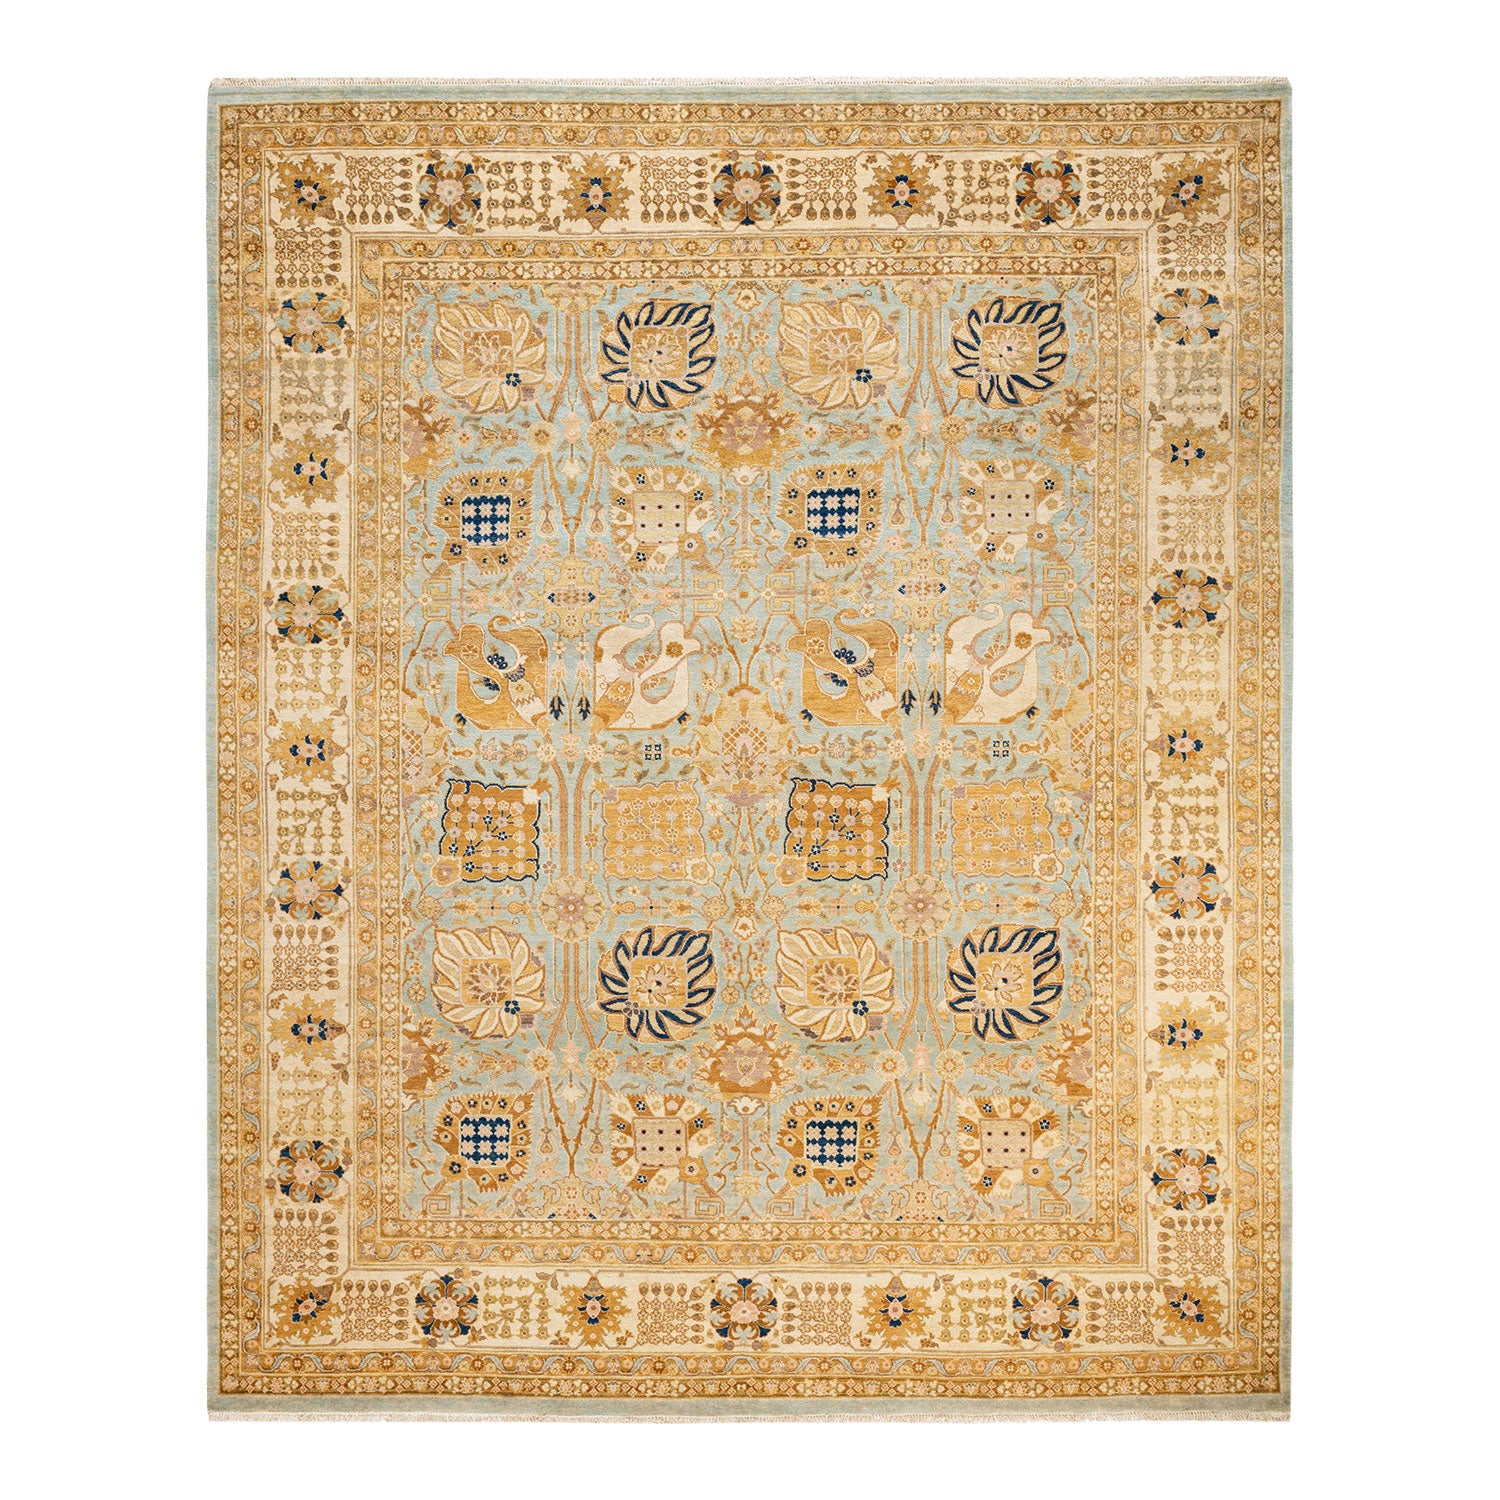 Ornate rectangular area rug with intricate symmetrical design in blue.